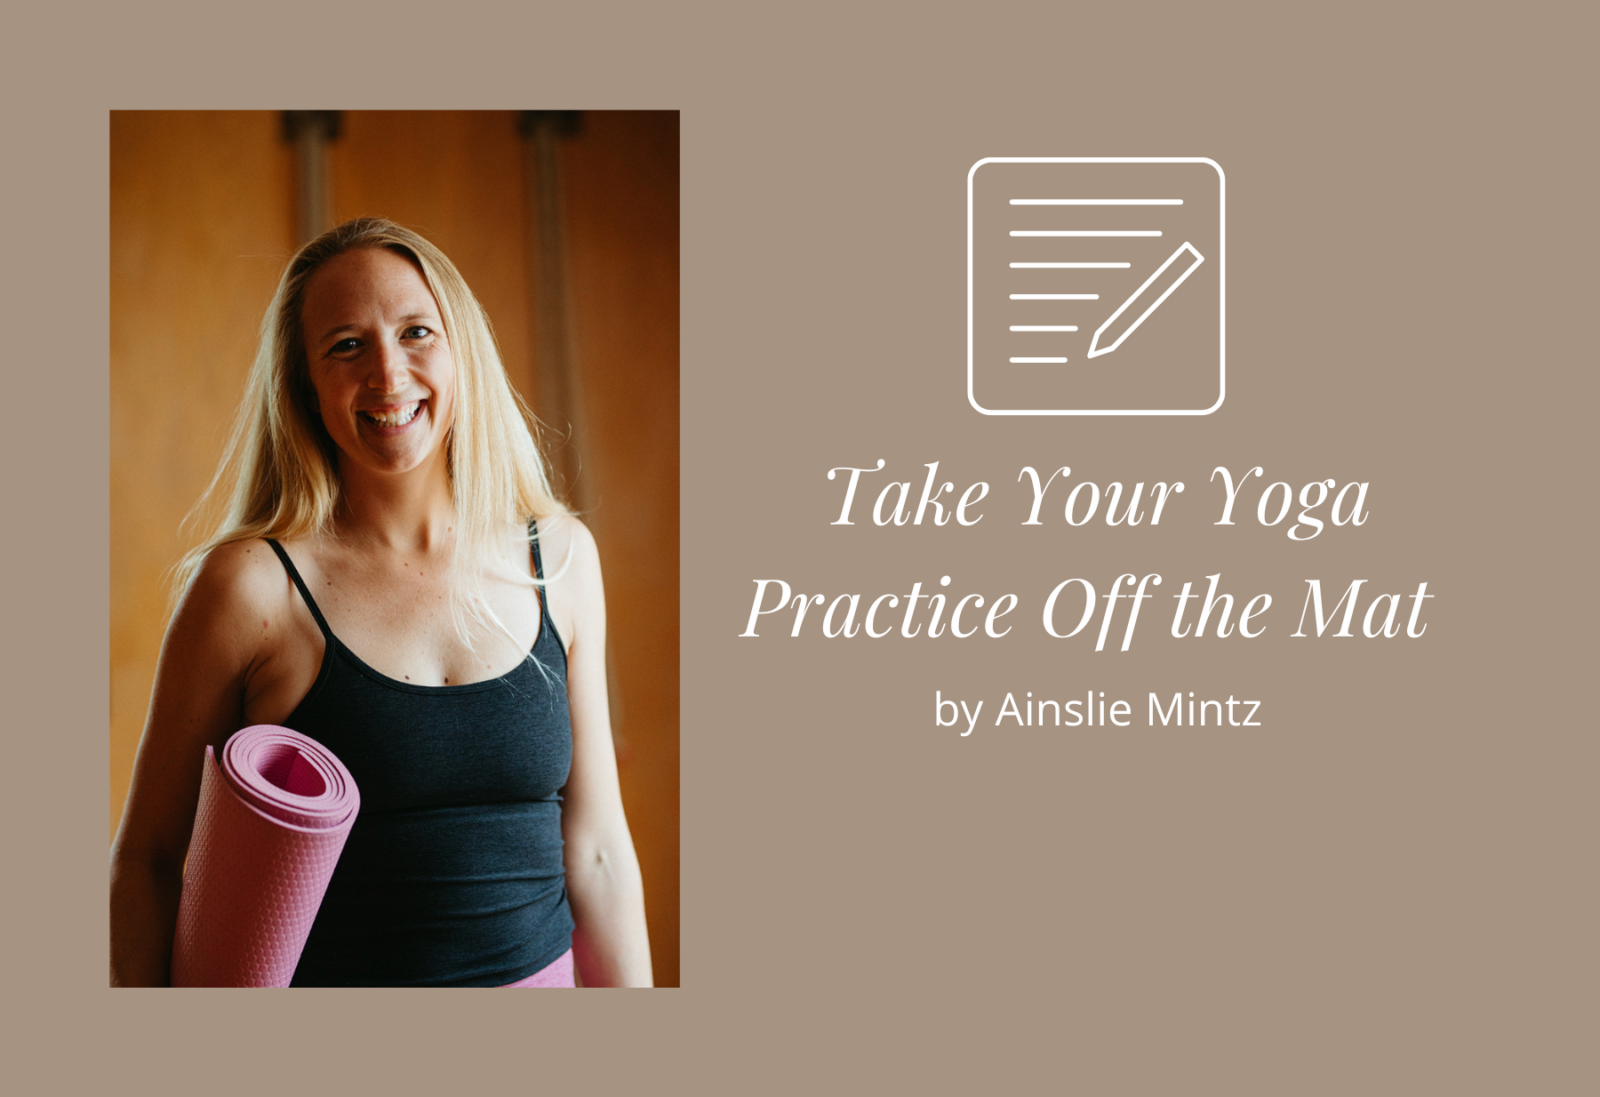 Take Your Yoga Practice Off the Mat by Ainslie Mintz